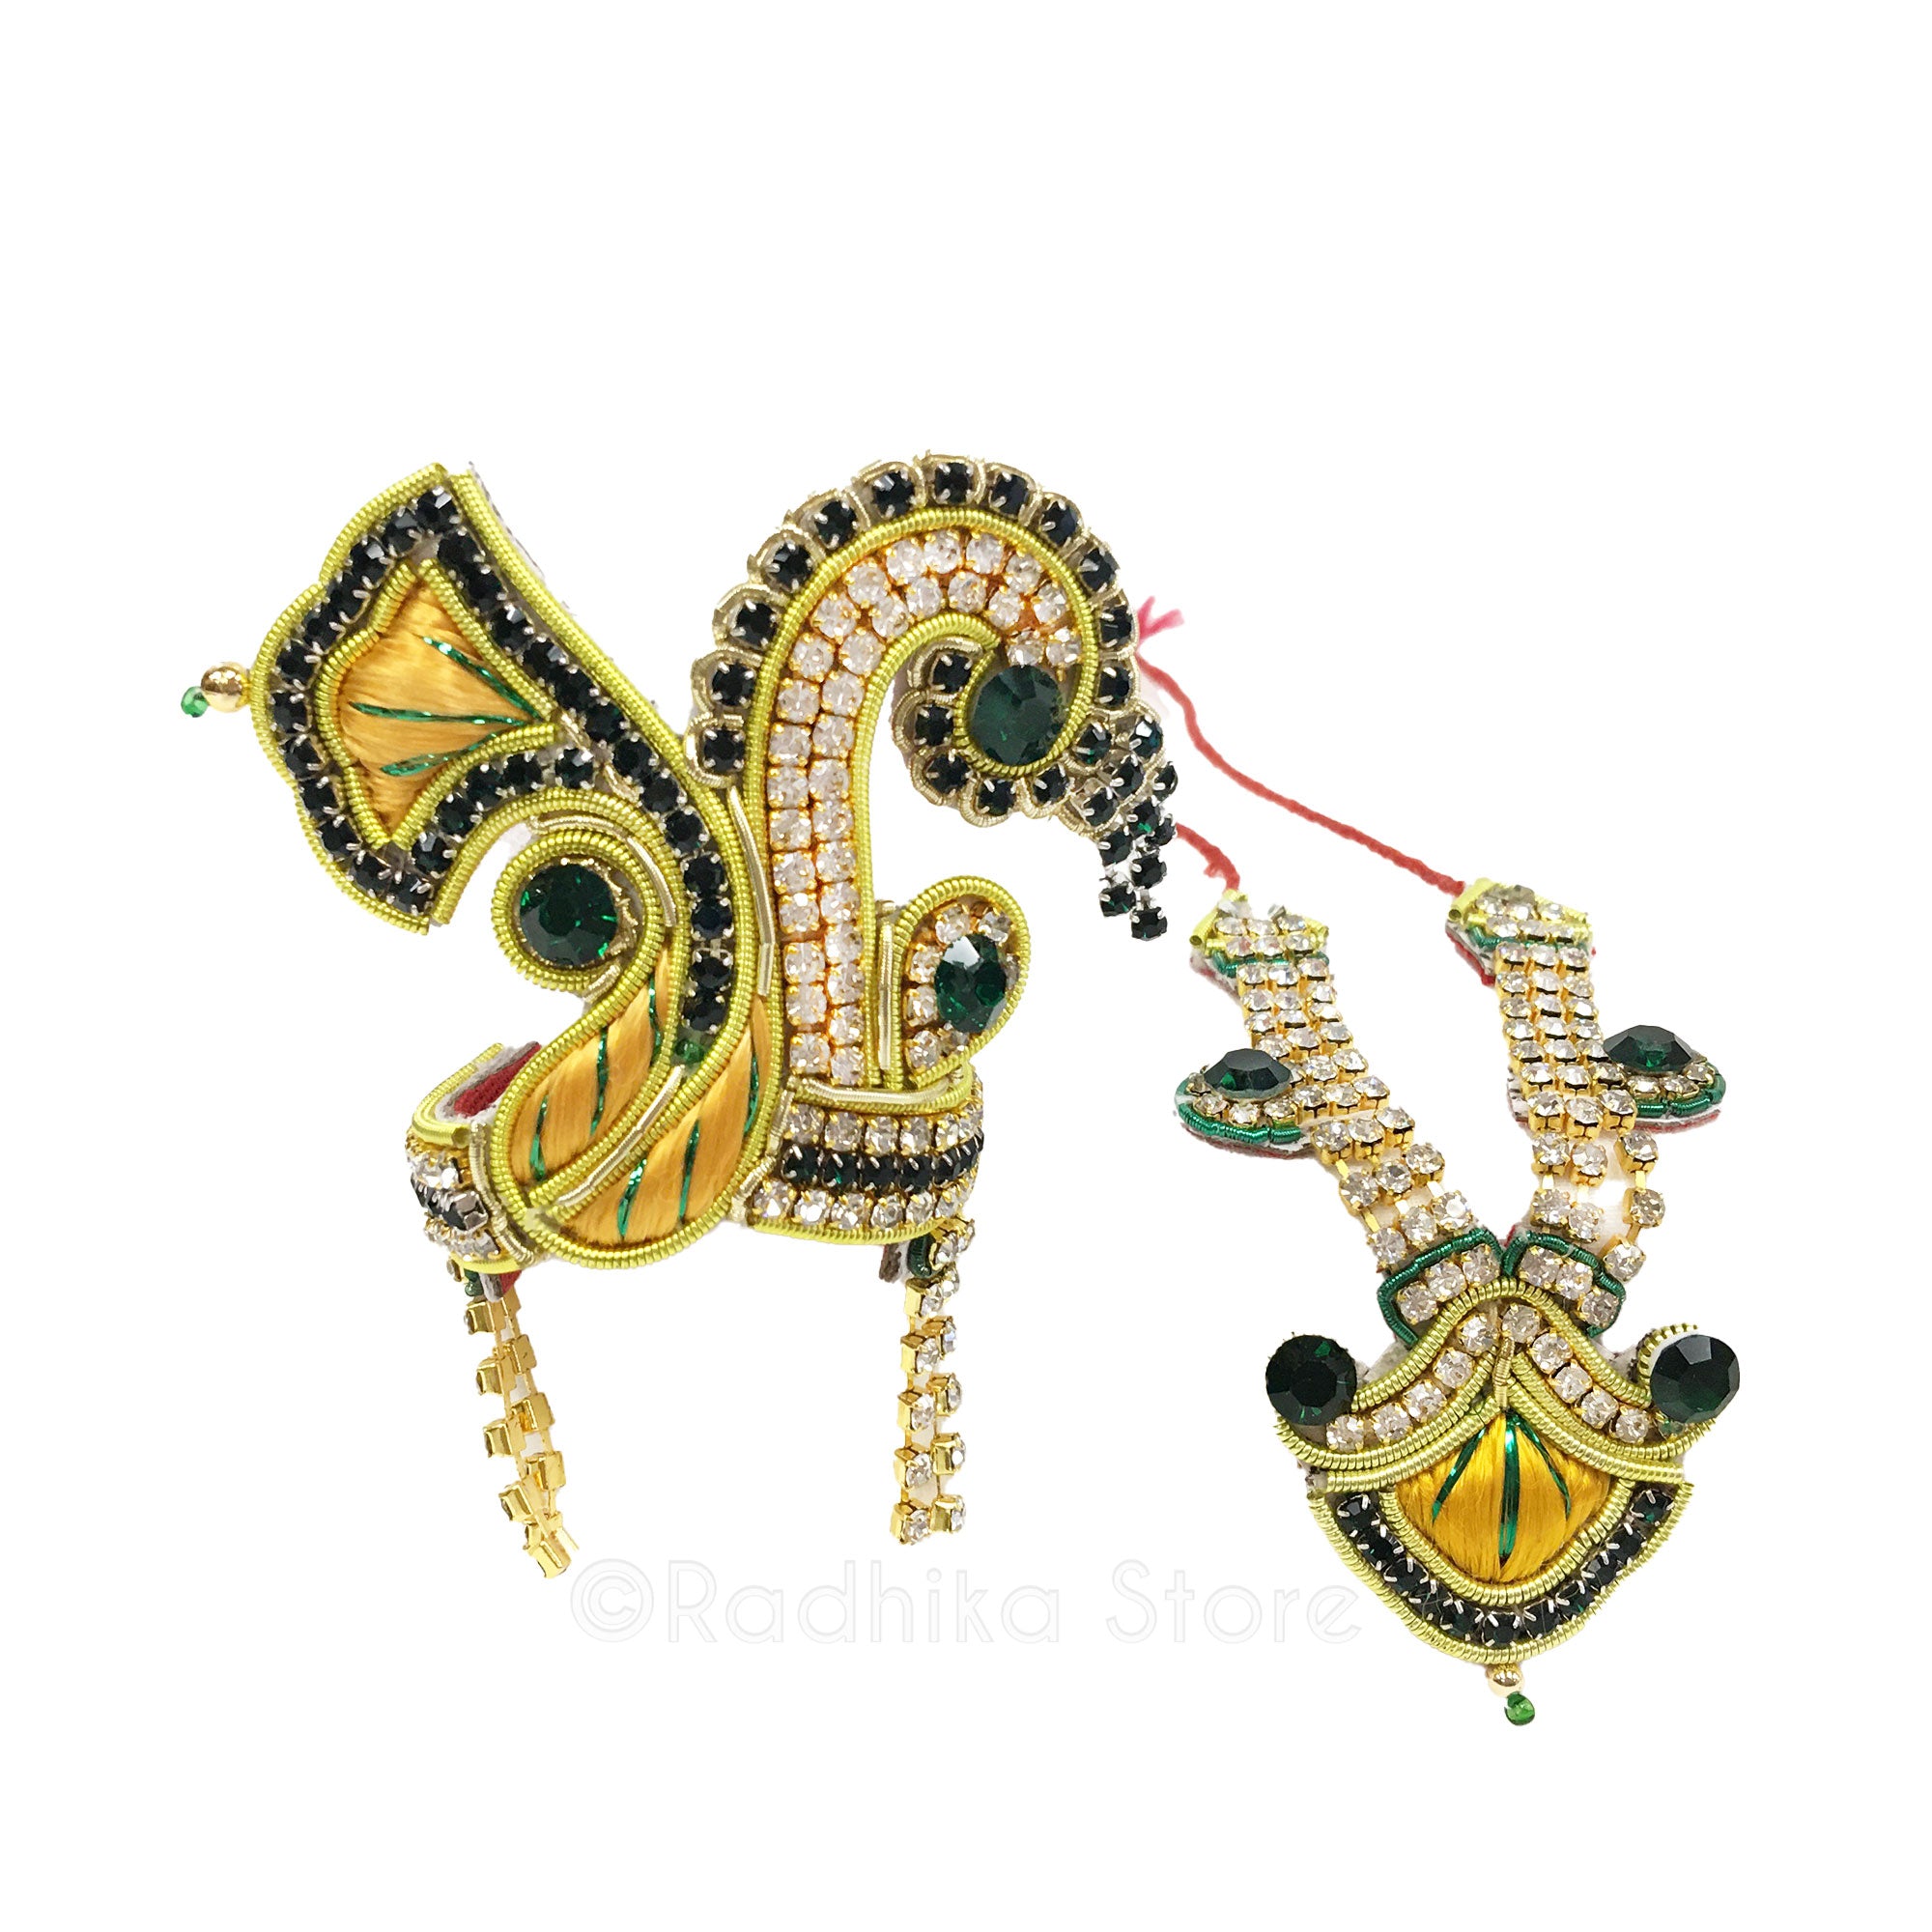 Golden Emerald Forest Swan - Deity Crown and Necklace Set